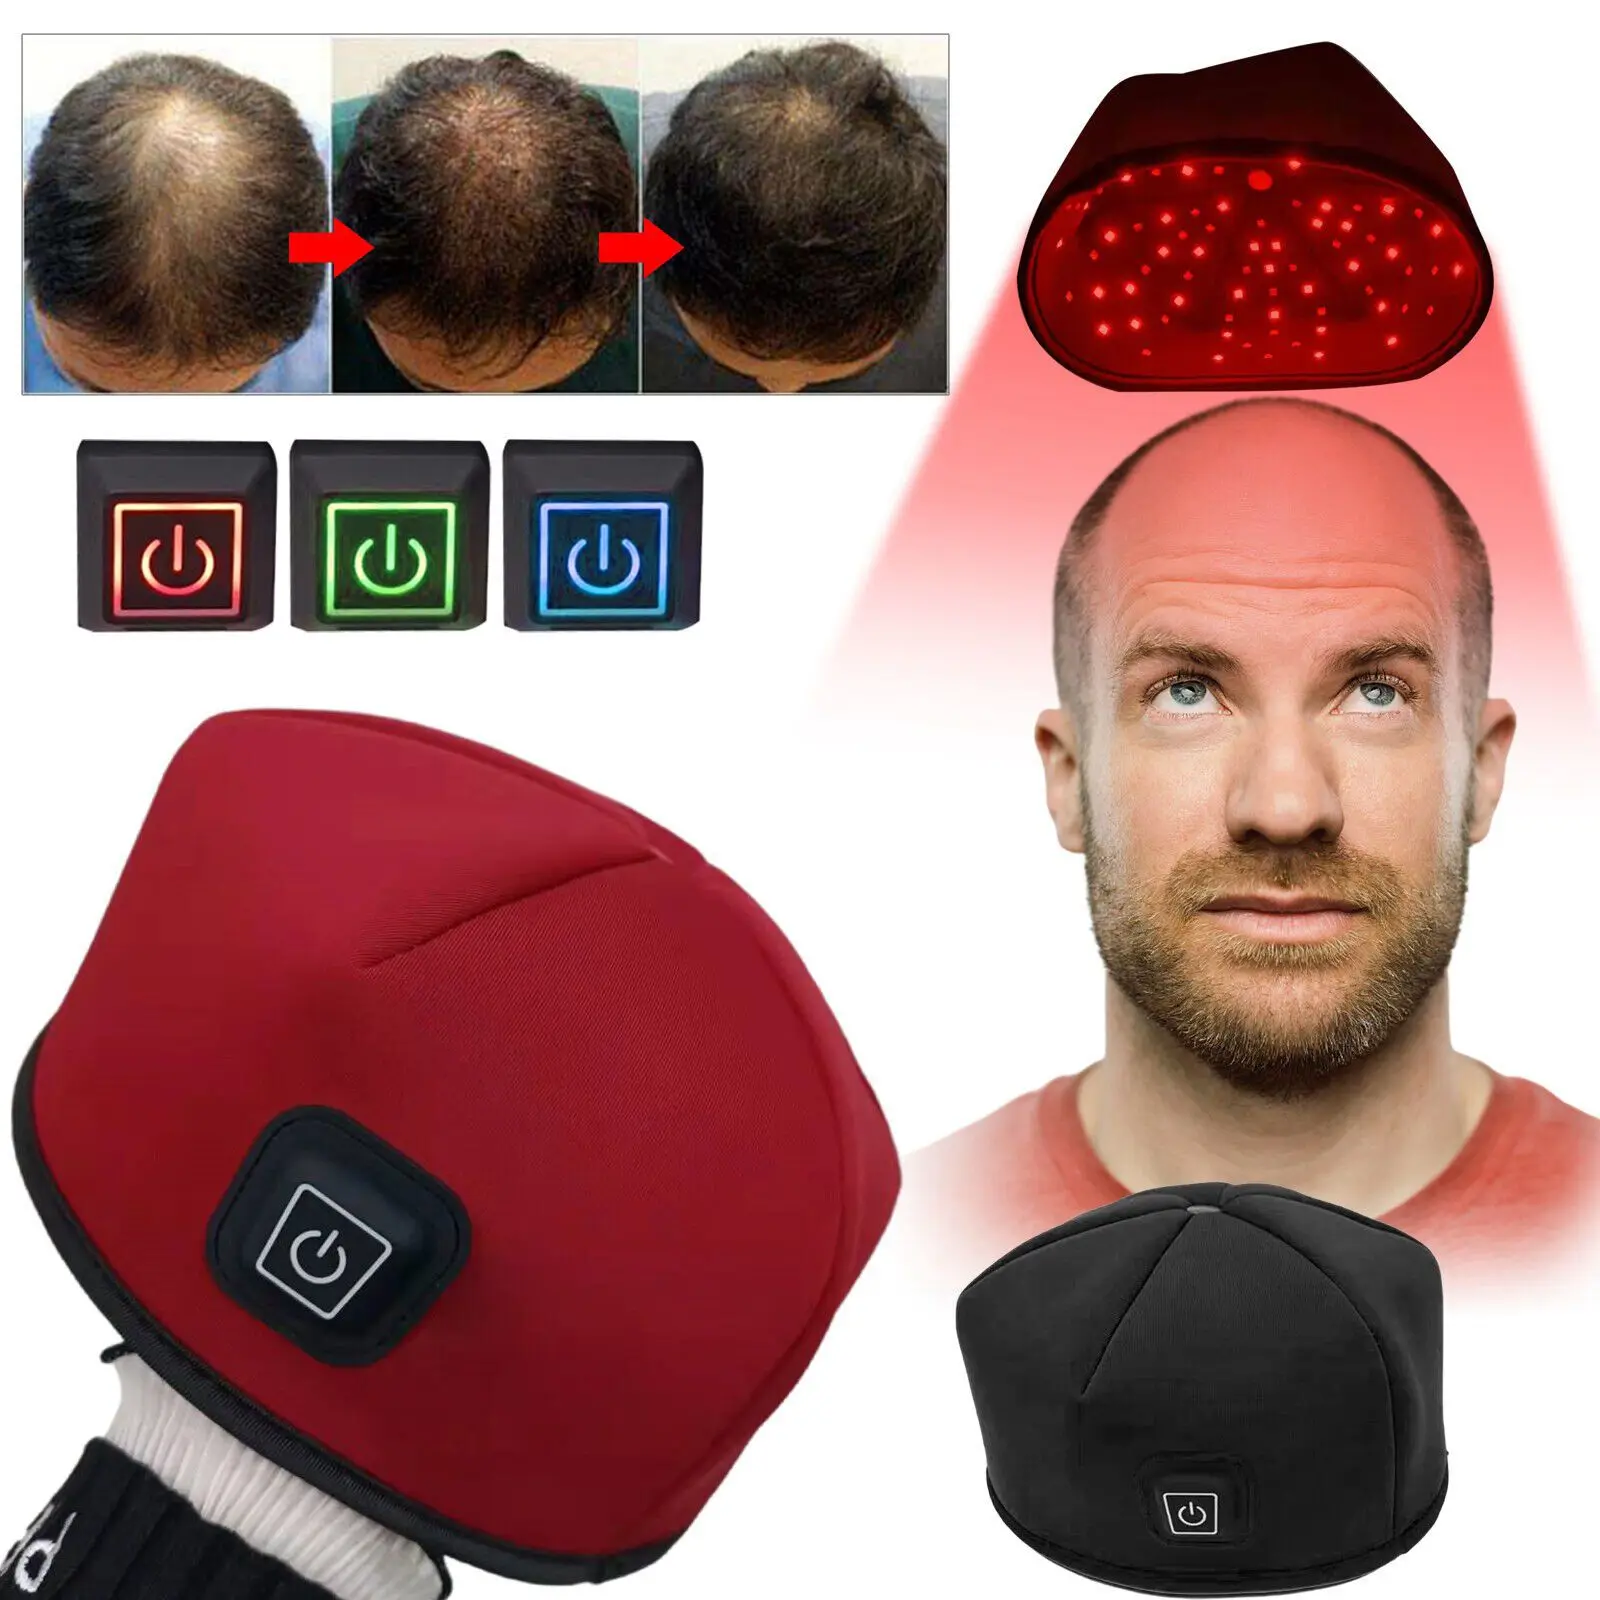 Near Infrared Red Light Therapy Cap Hair Regrowth Anti Hair Loss Treatment Hat